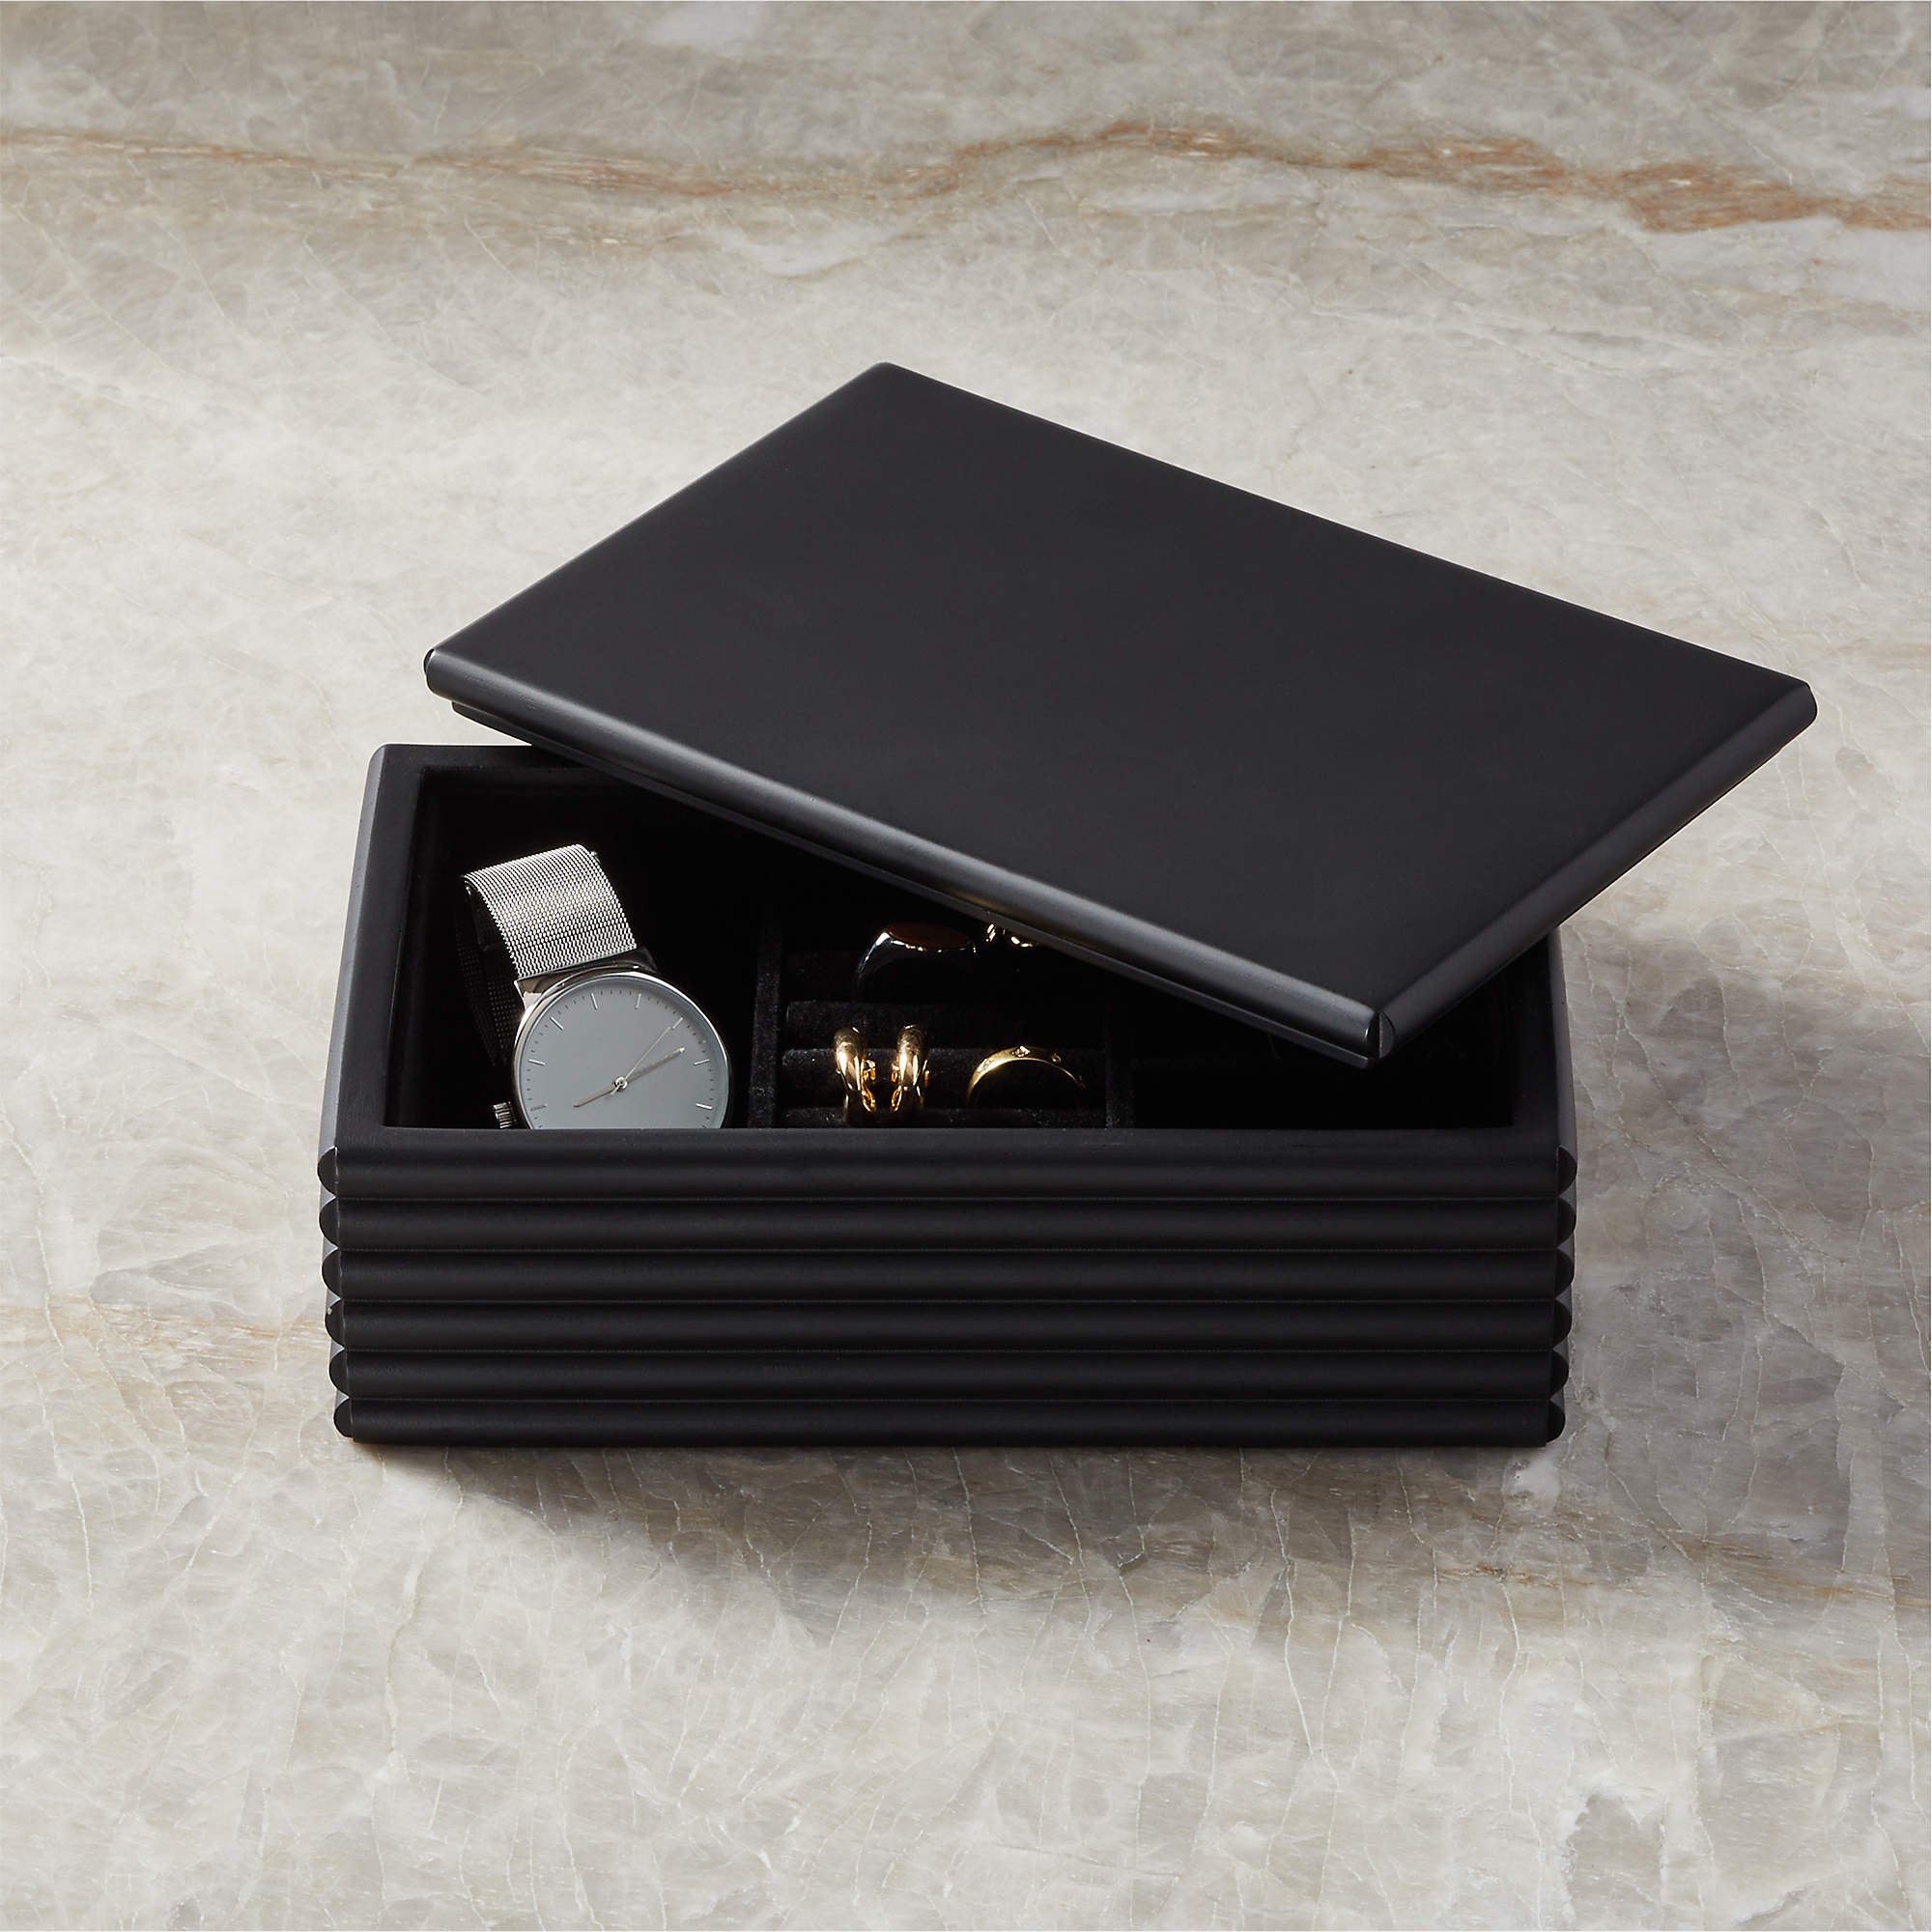 black lidded jewelry box with watch and rings inside